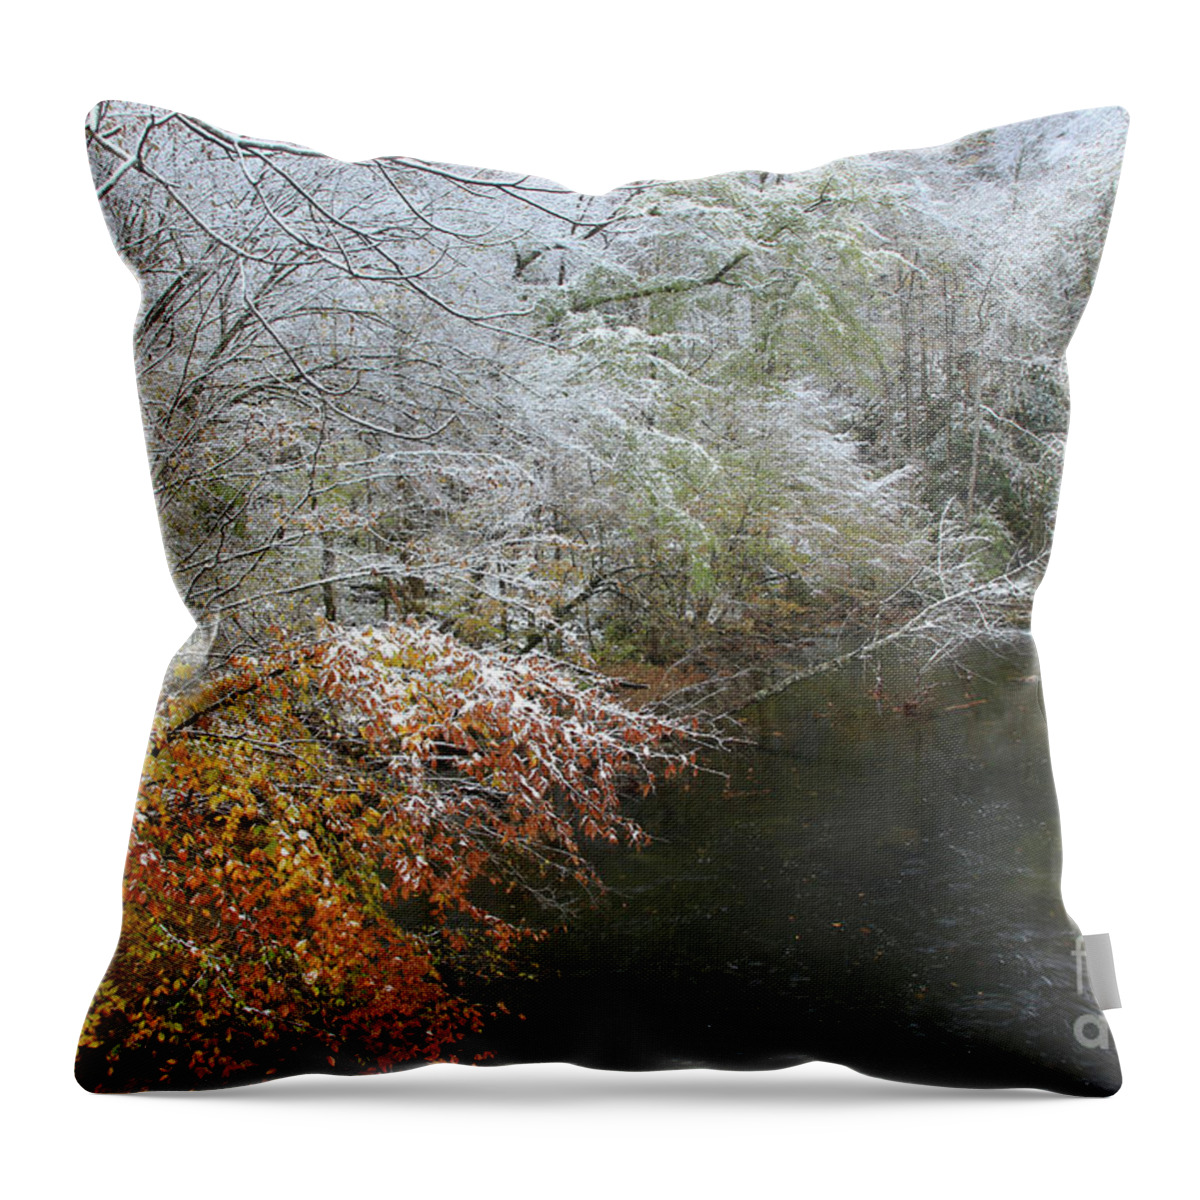 Winter Scene Throw Pillow featuring the photograph Smoky Mountain November Snow 2 by Mike Eingle